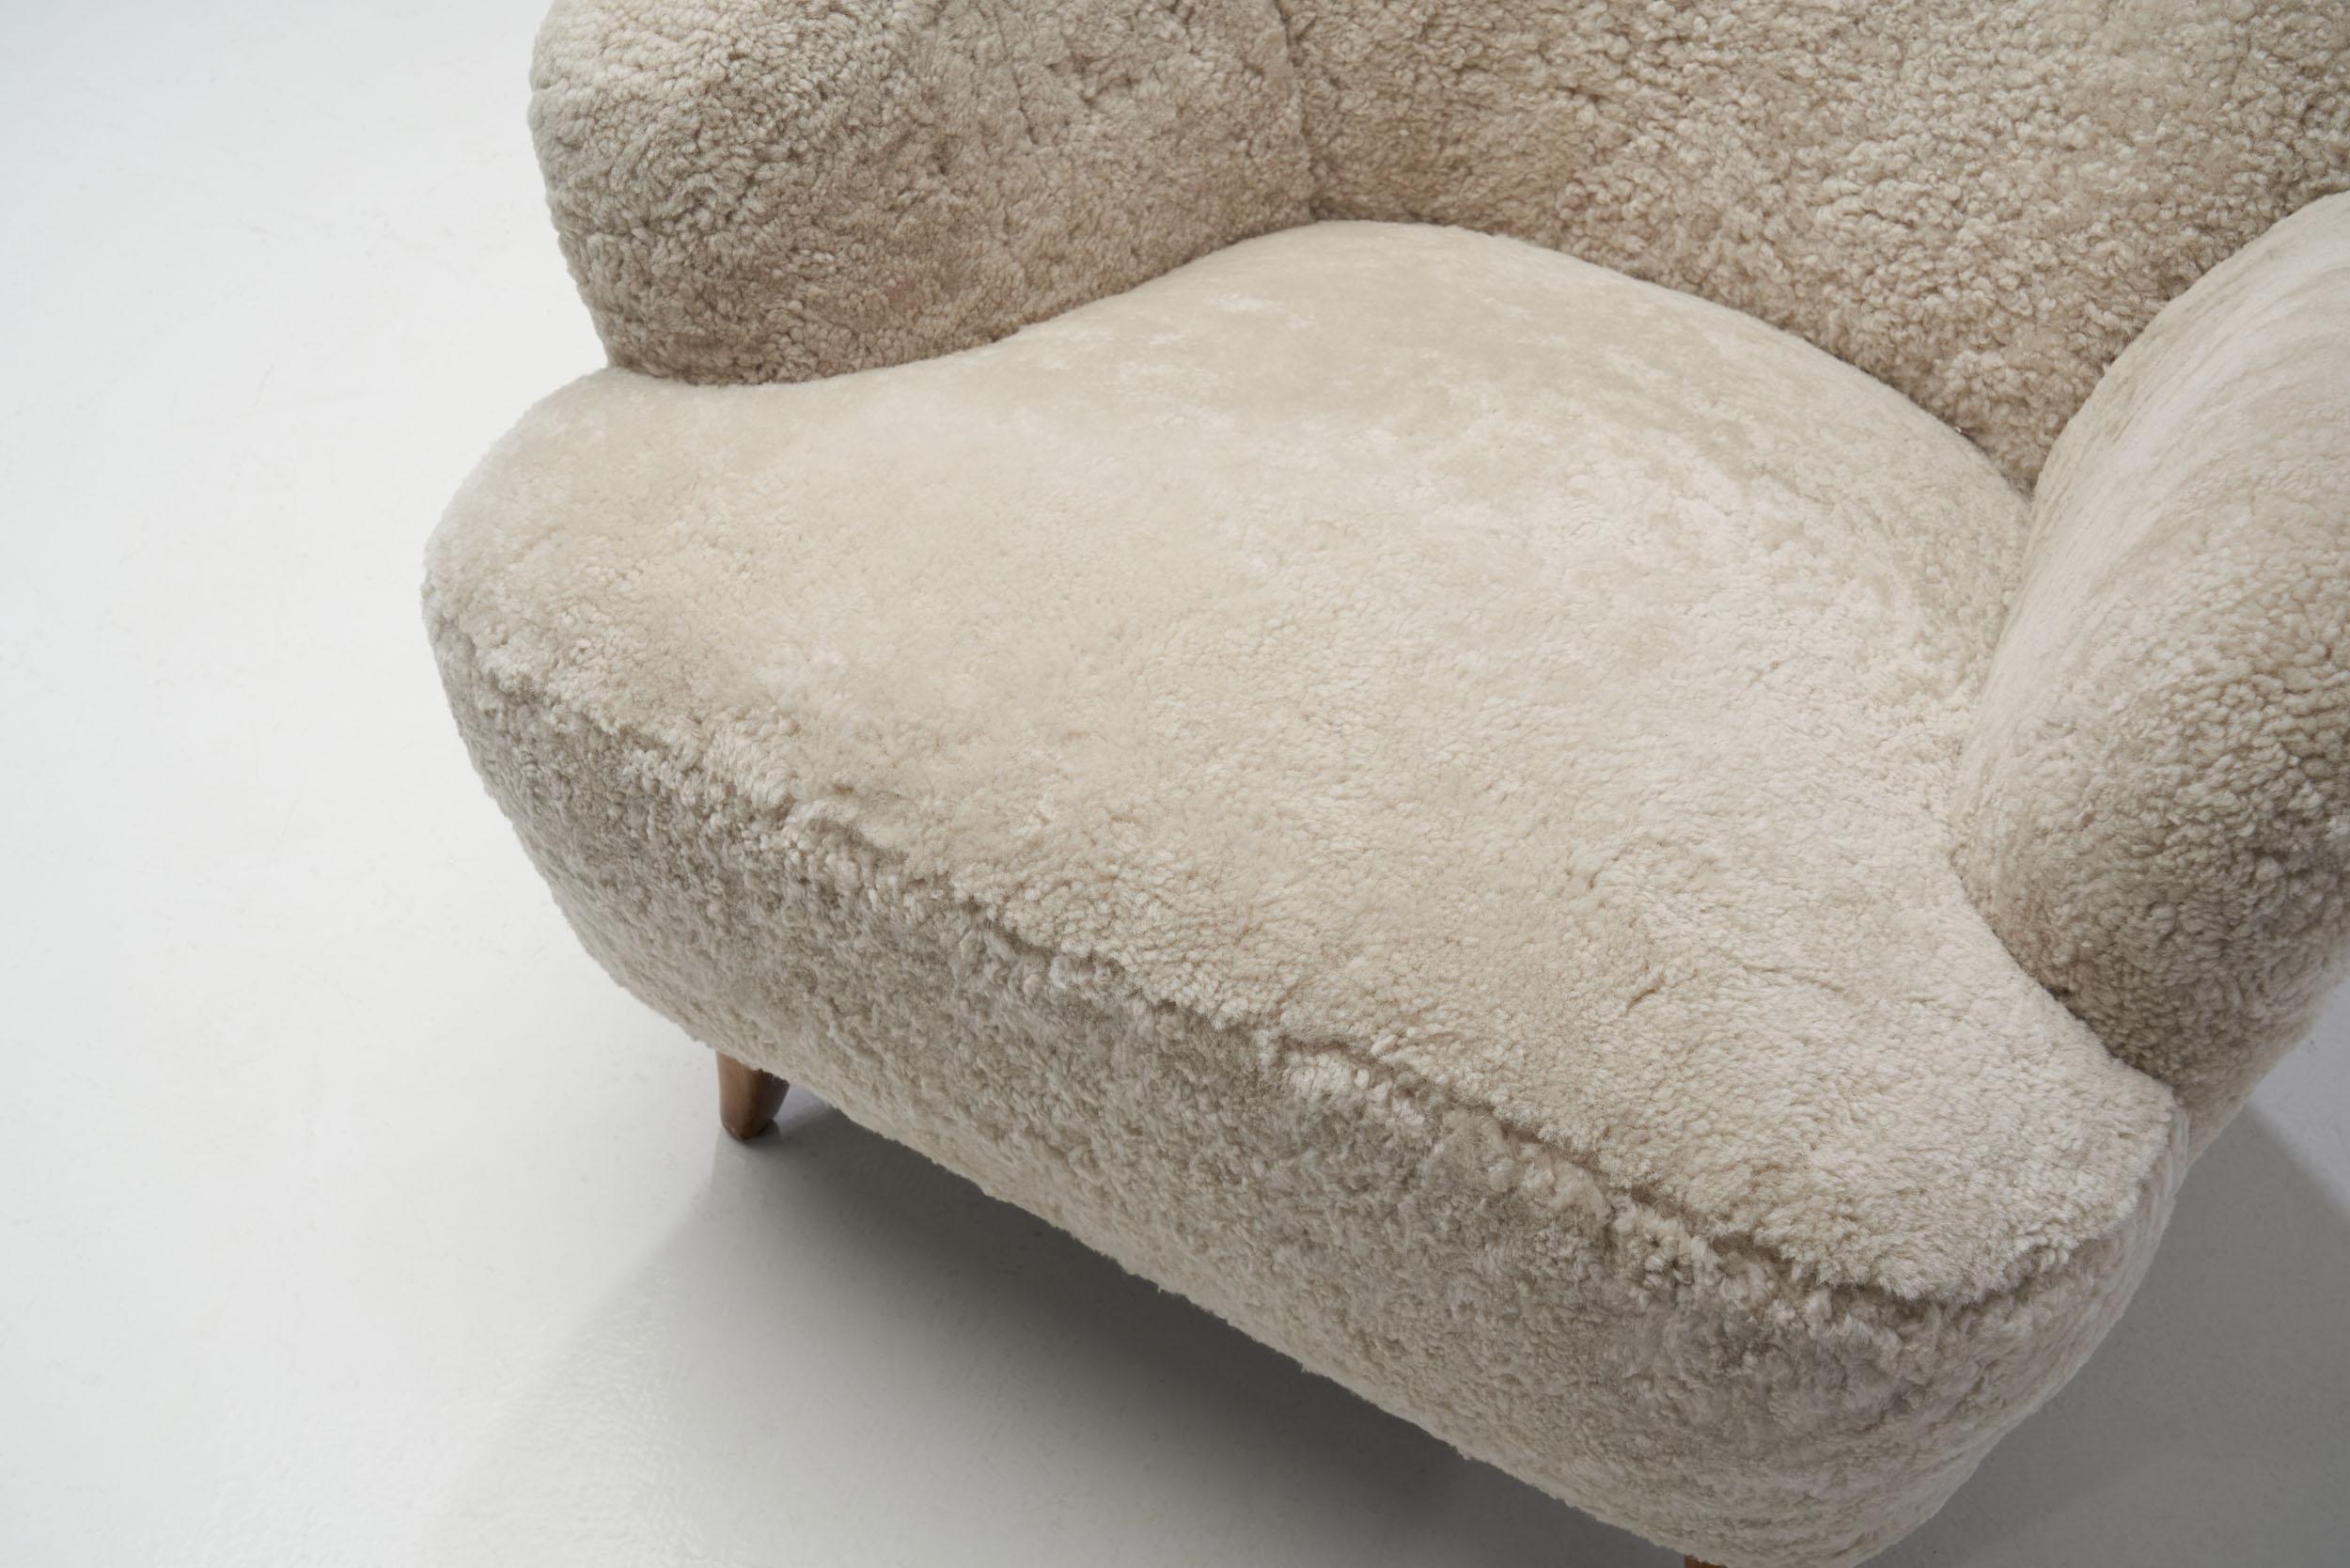 Pair of “Laila” Armchairs in Sheepskin by Ilmari Lappalainen, Finland 1948 For Sale 9